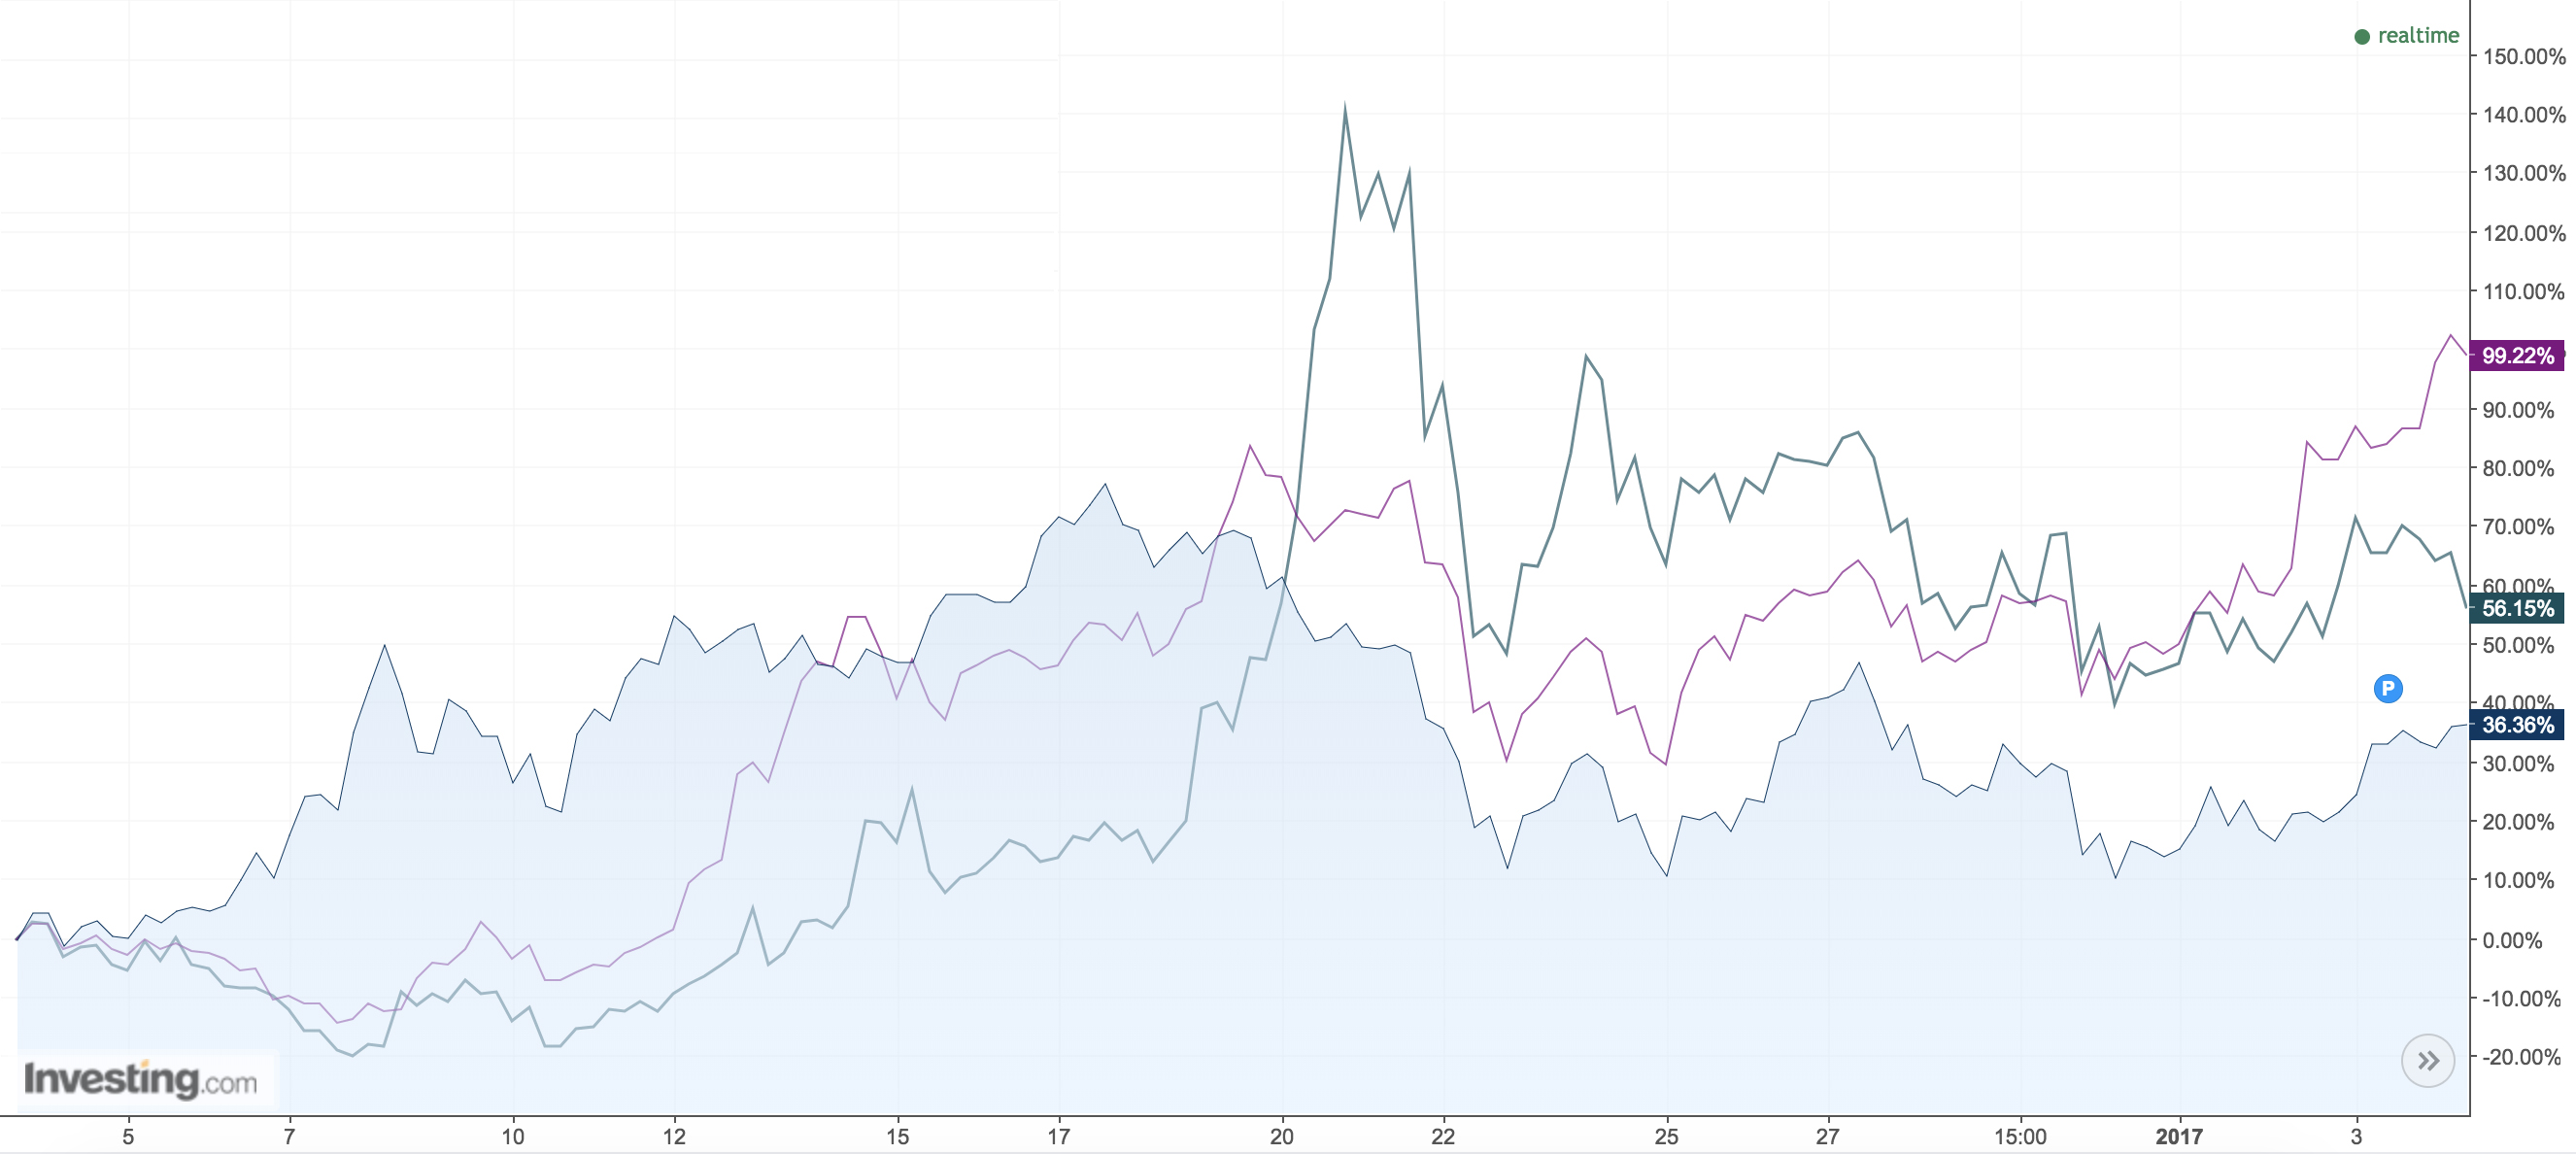 The US dollar performance of Bitcoin, Ether and Bitcoin Cash over the last month. Bitcoin is the shaded line, Ether, purple and Bitcoin Cash, green. Pic Investing.com